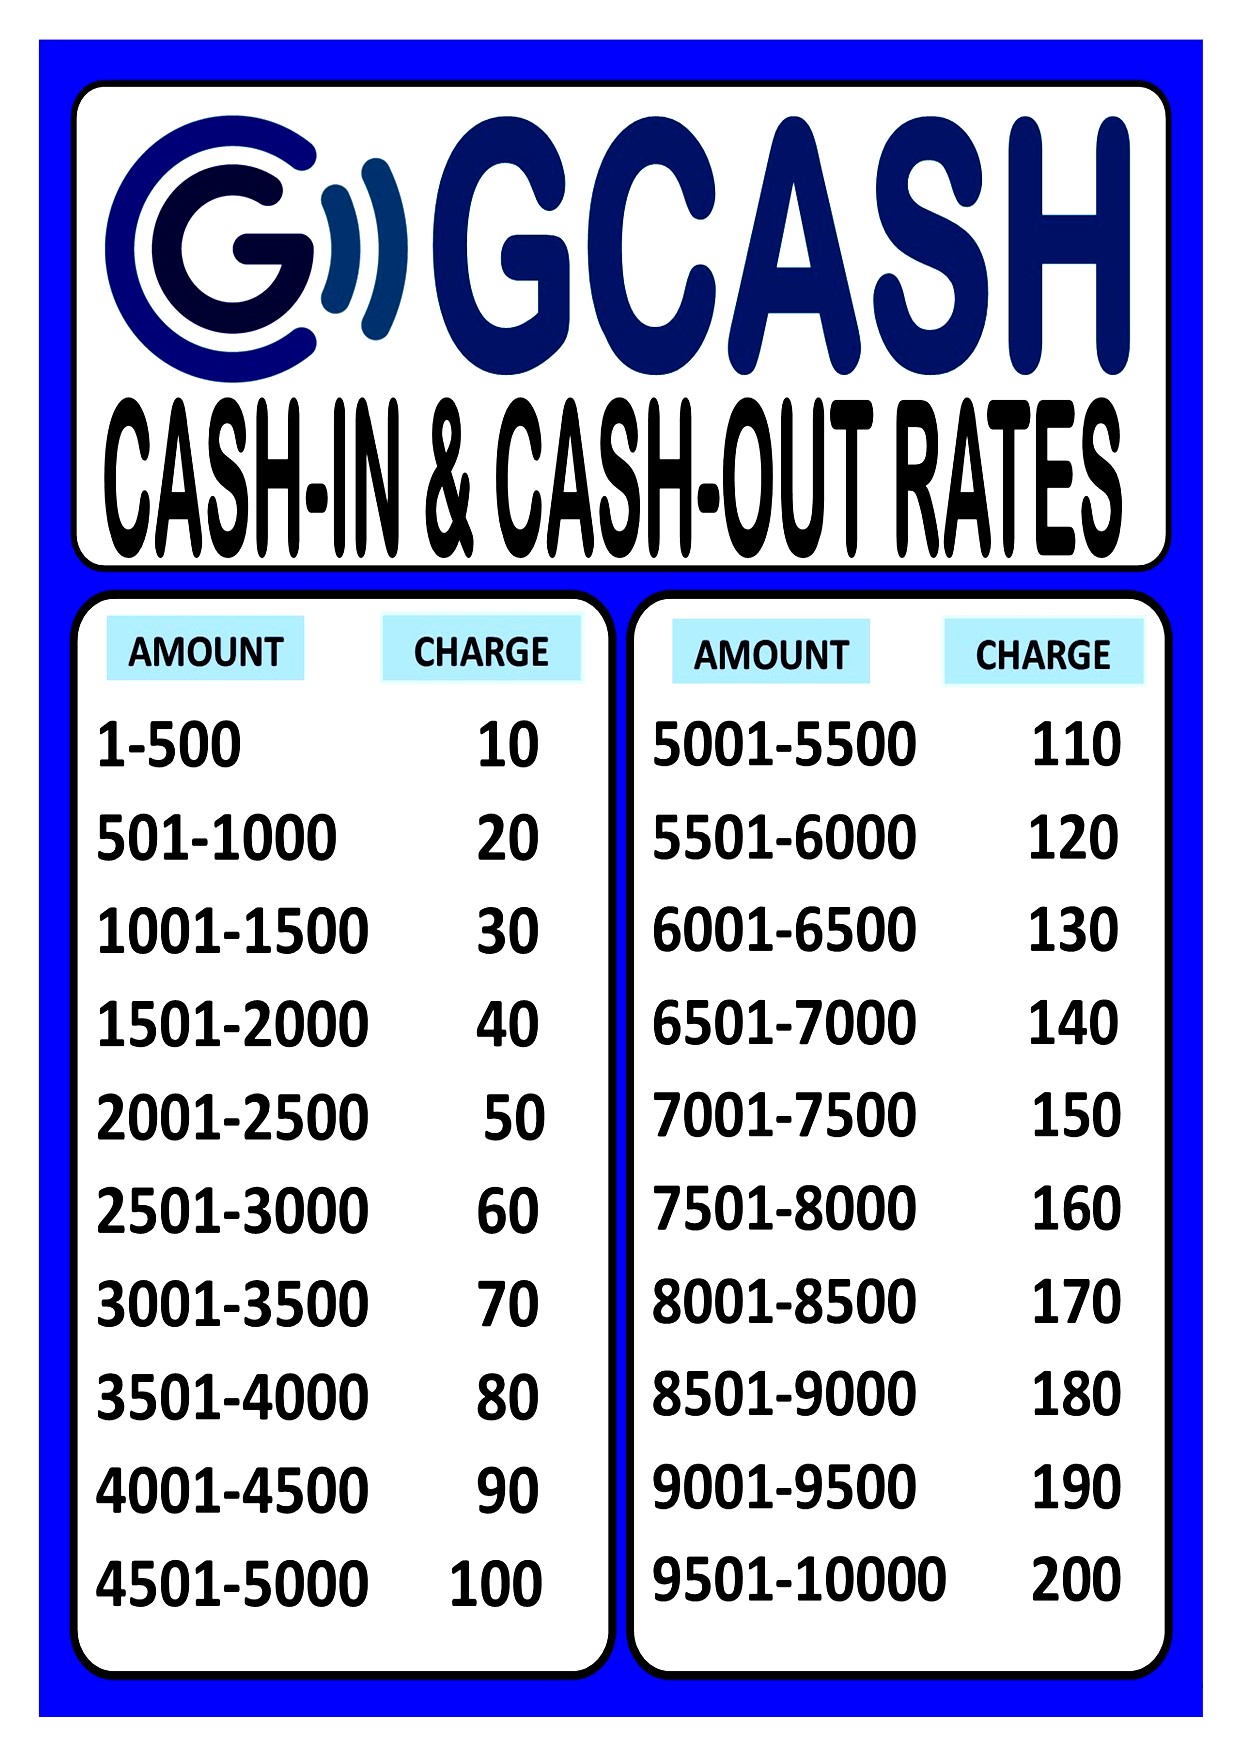 cash-in-out-rates-10up-laminated-pvc-pet-signage-a4-size-lazada-ph